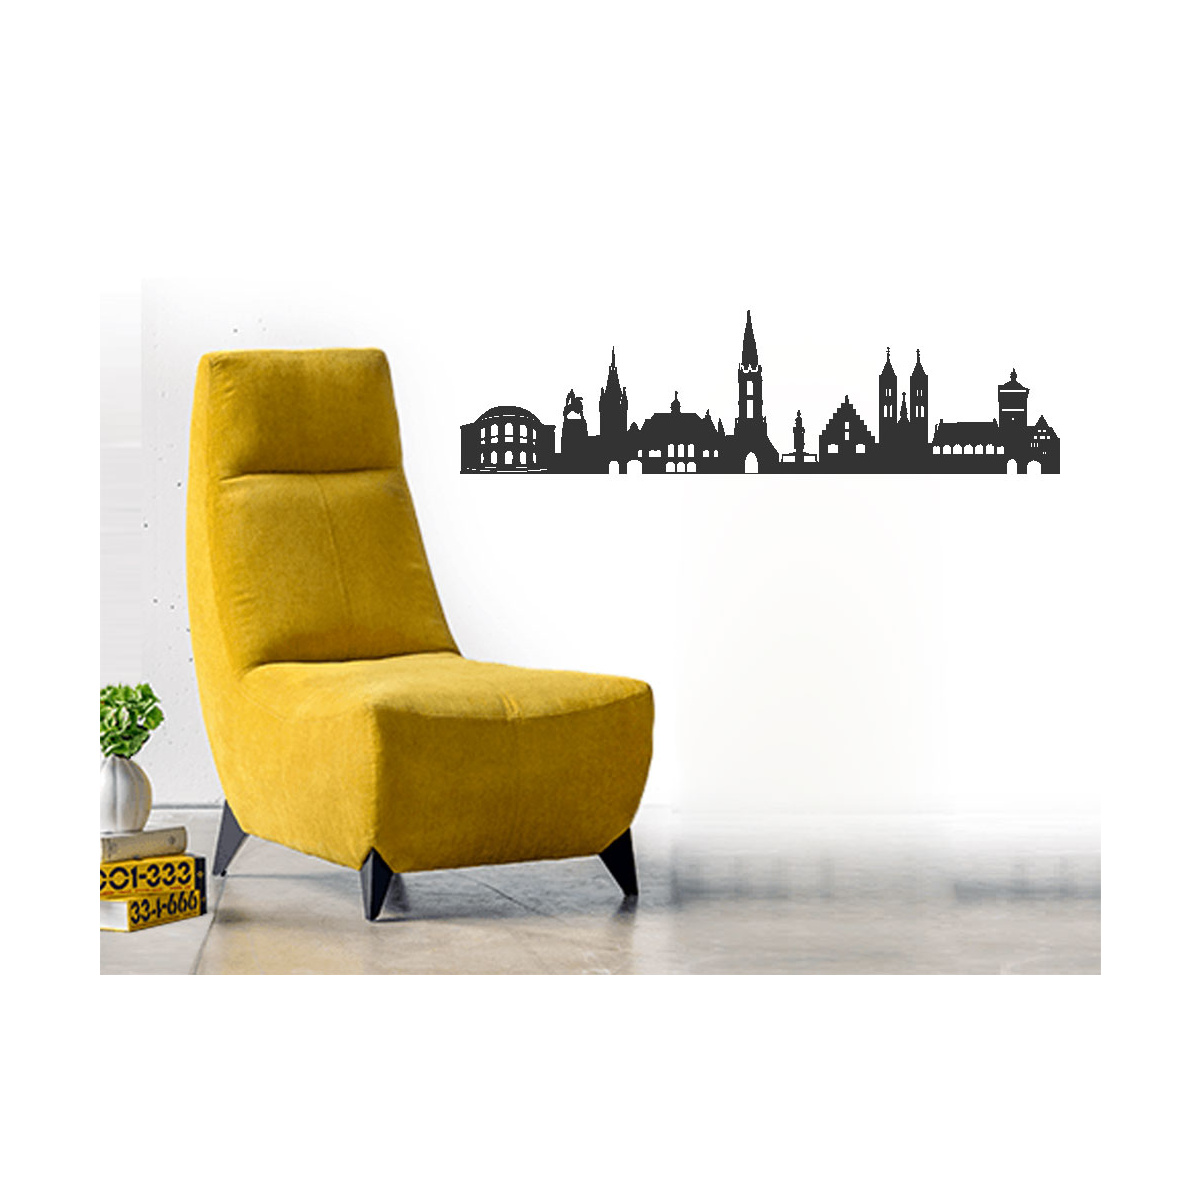 order Freiburg online from decal with theme tattoo 44spa skyline Wall